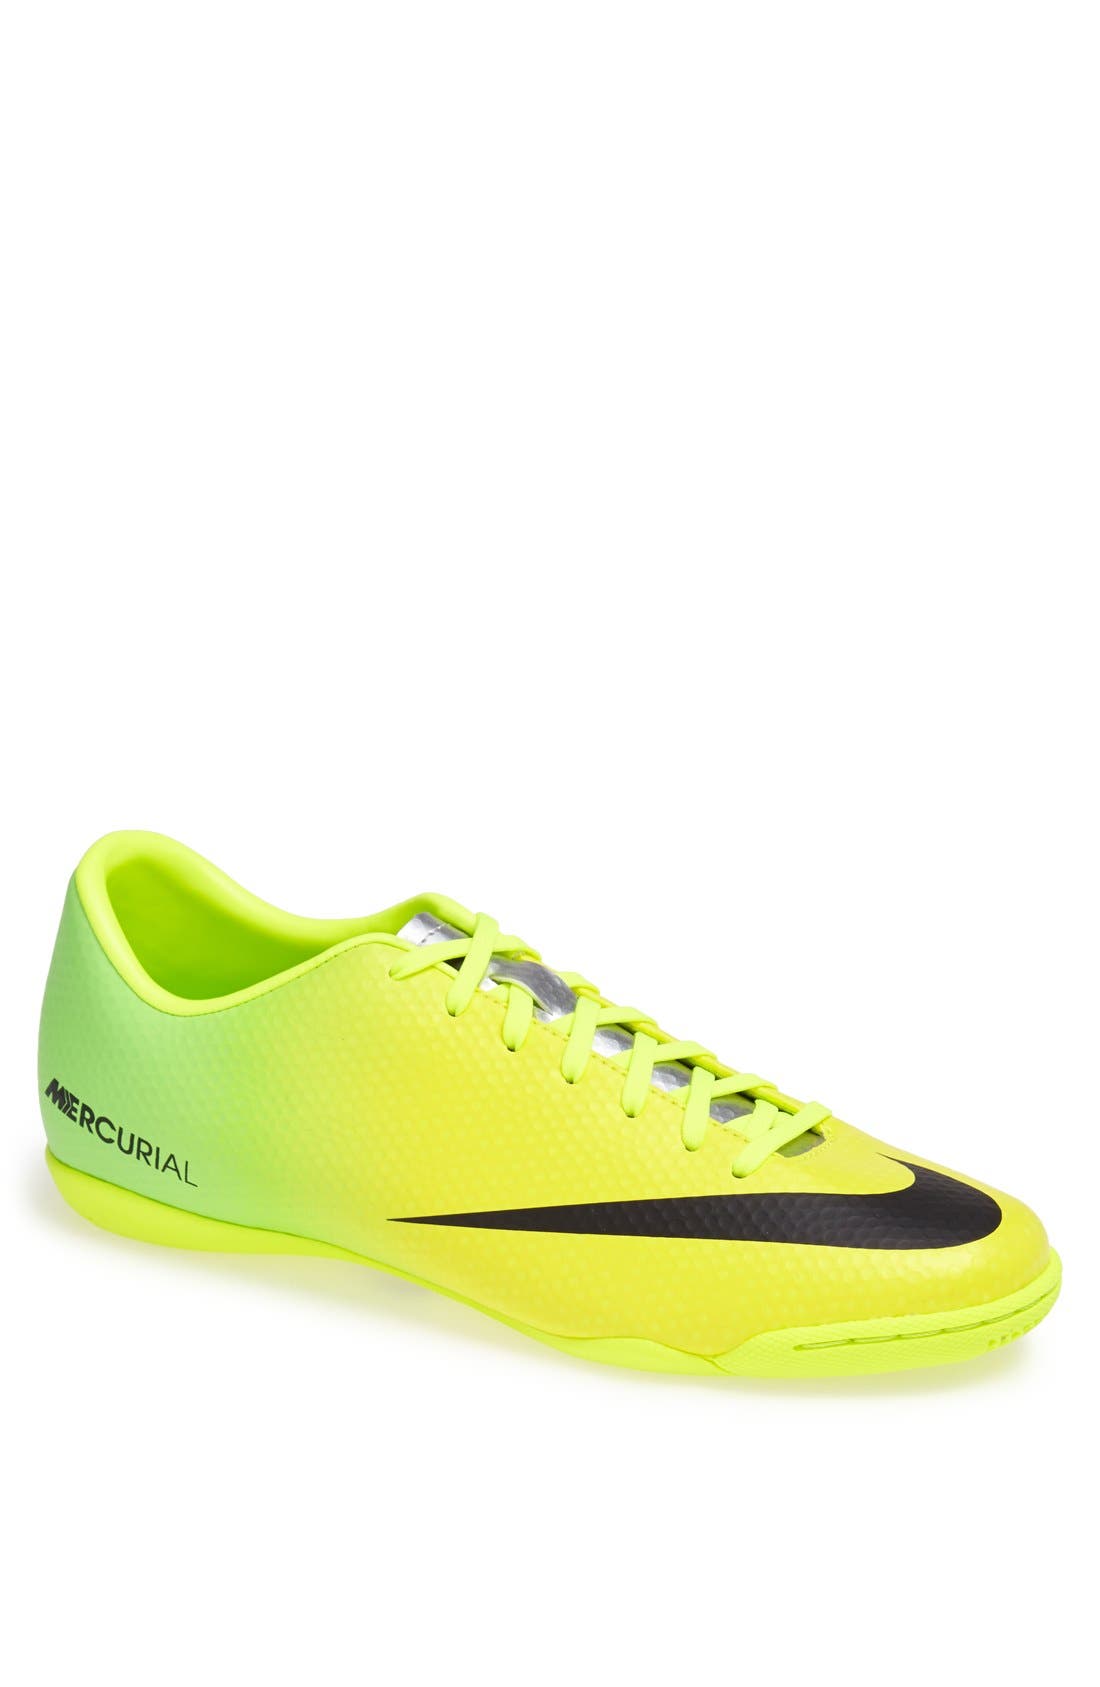 nike mercurial victory iv ic indoor soccer shoes